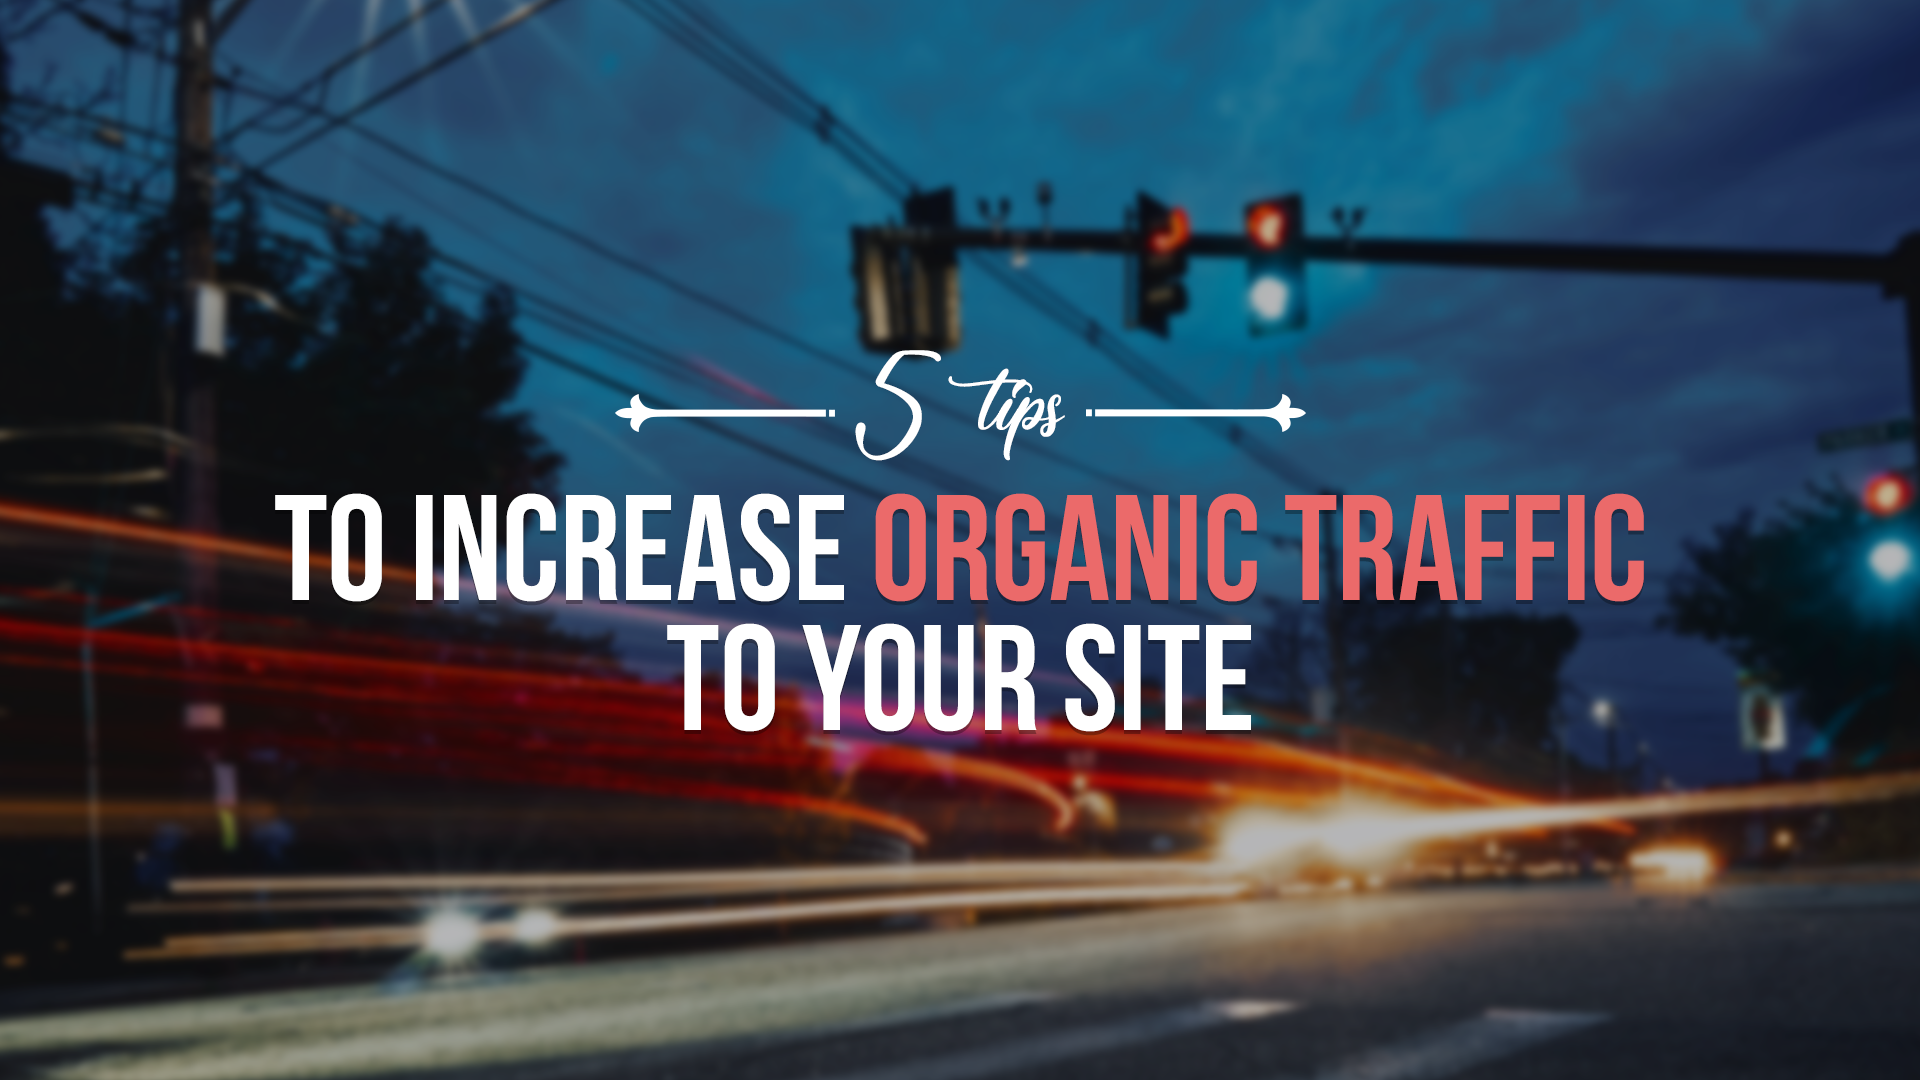 5 Tips To Increase Organic Traffic To Your Site